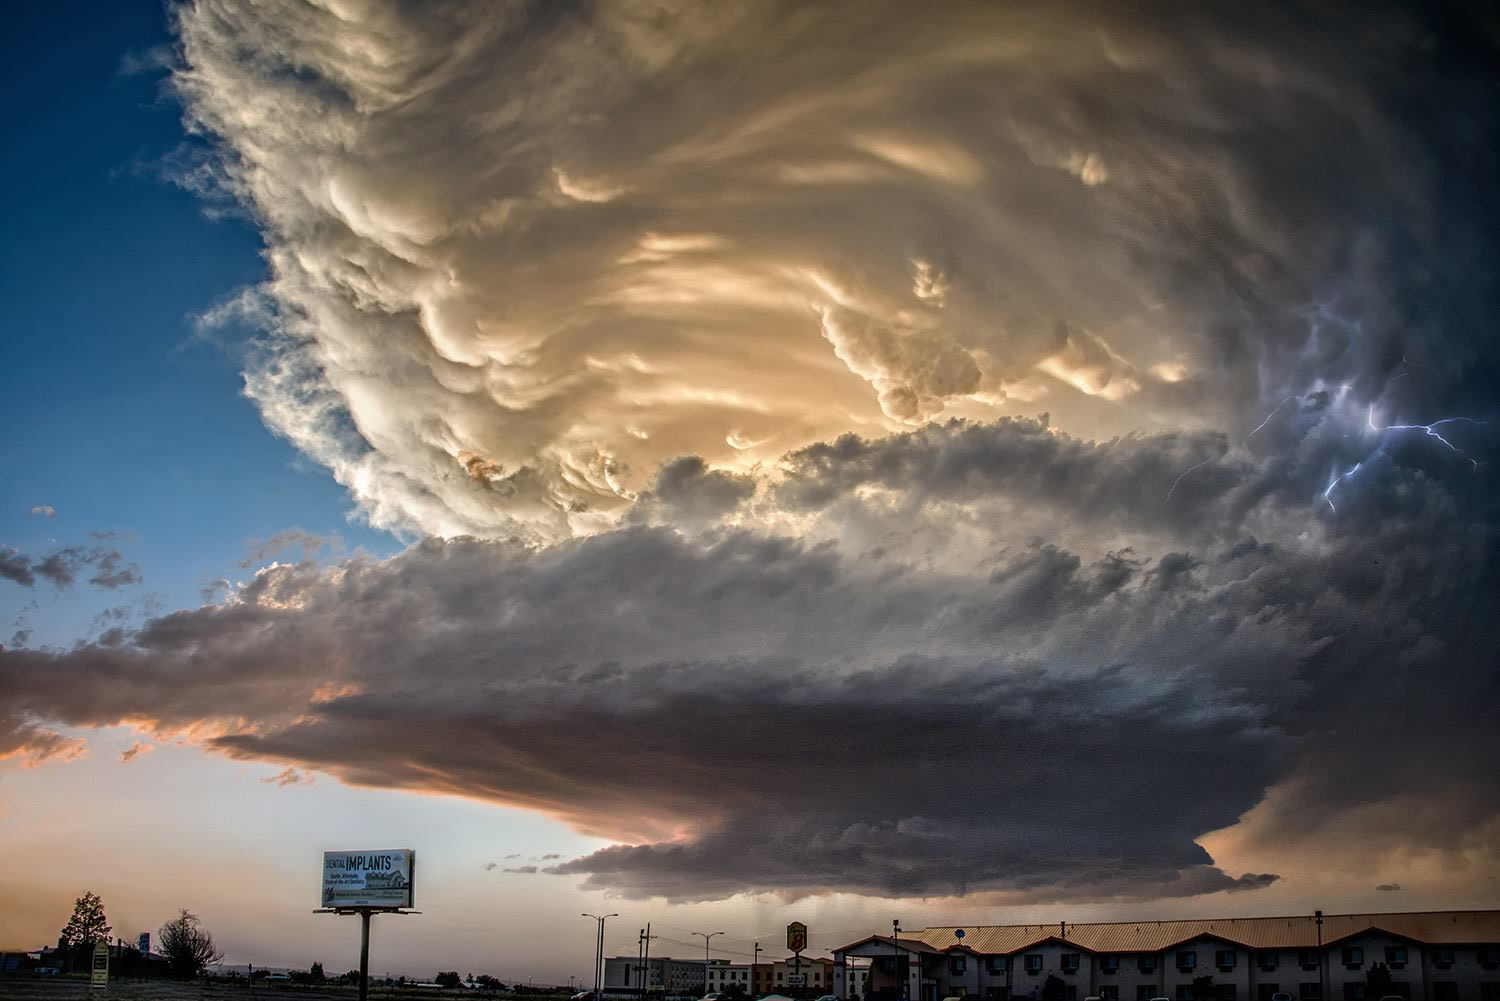 supercell by Jody Miller